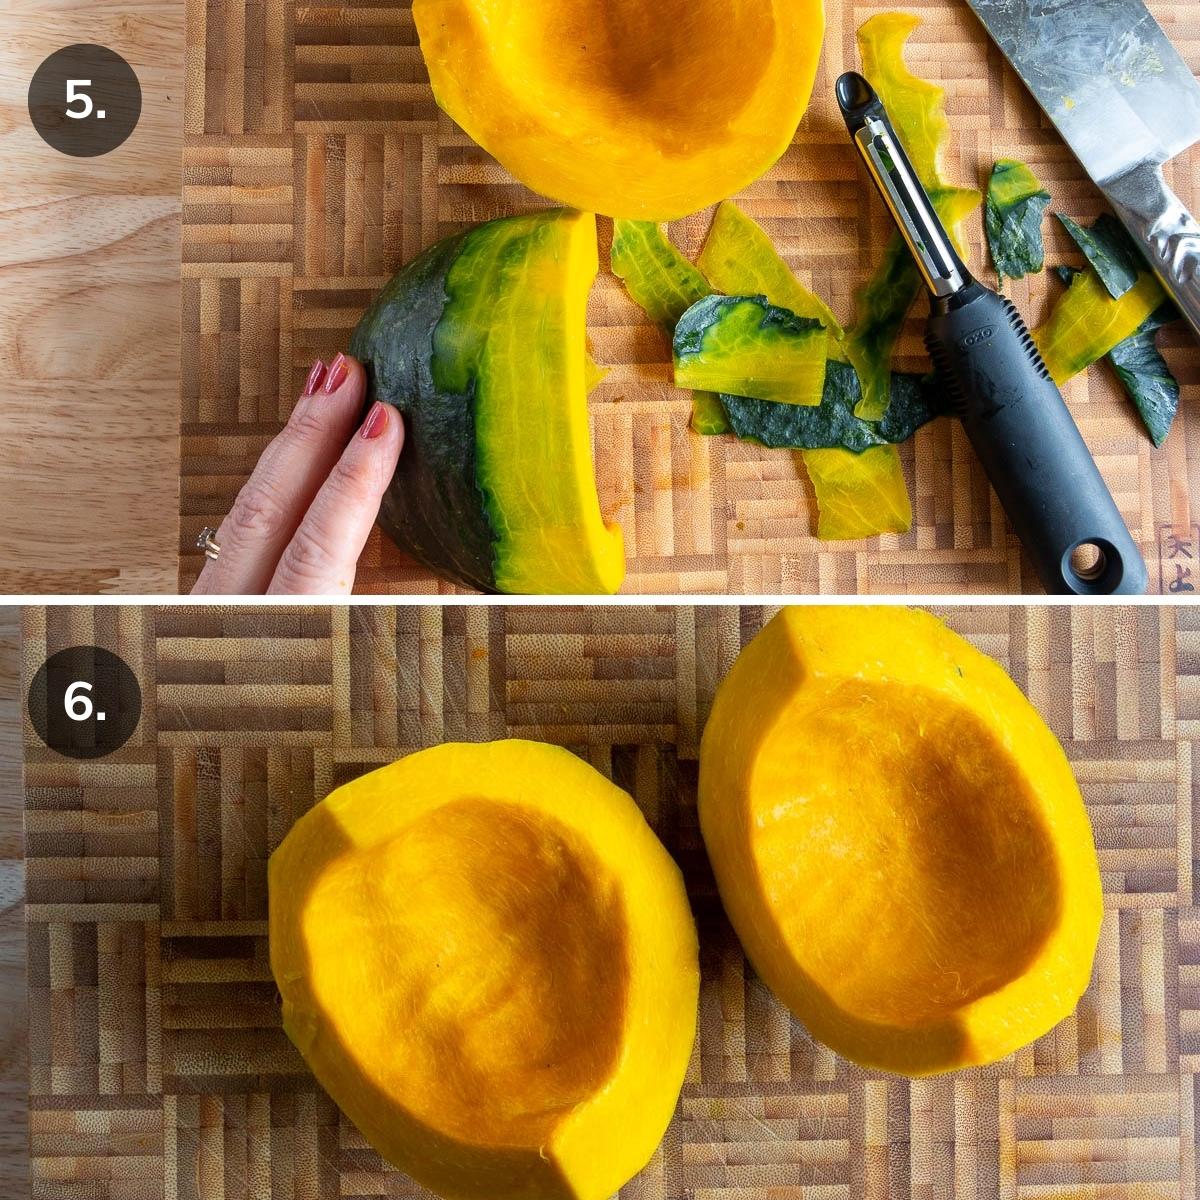 Peeling the winter squash with a peeler.